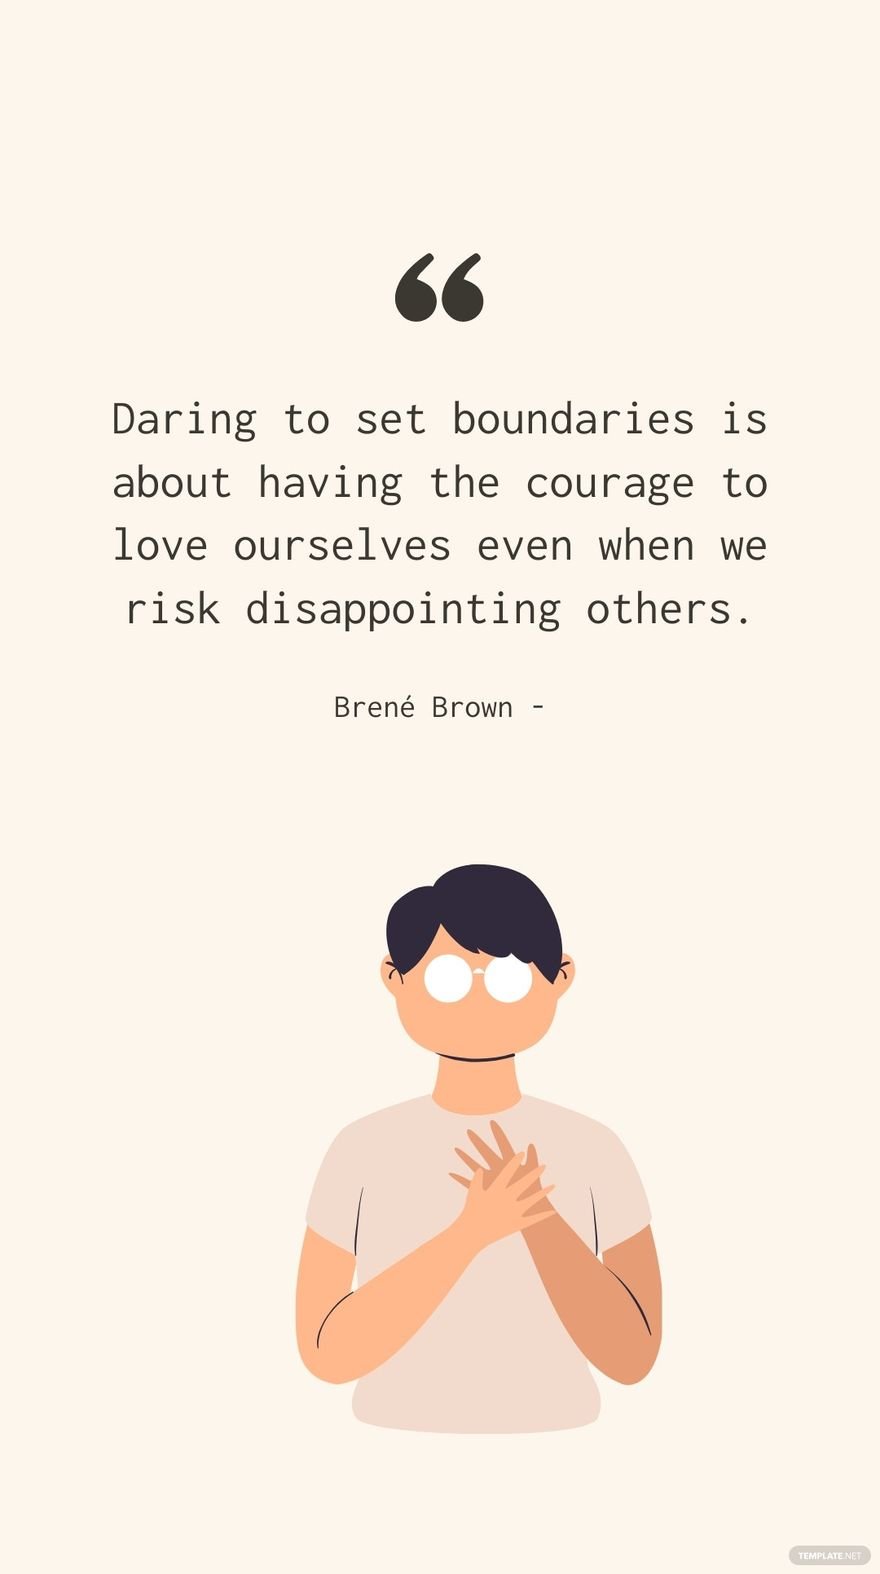 Free Brené Brown - Daring to set boundaries is about having the courage to love ourselves even when we risk disappointing others.